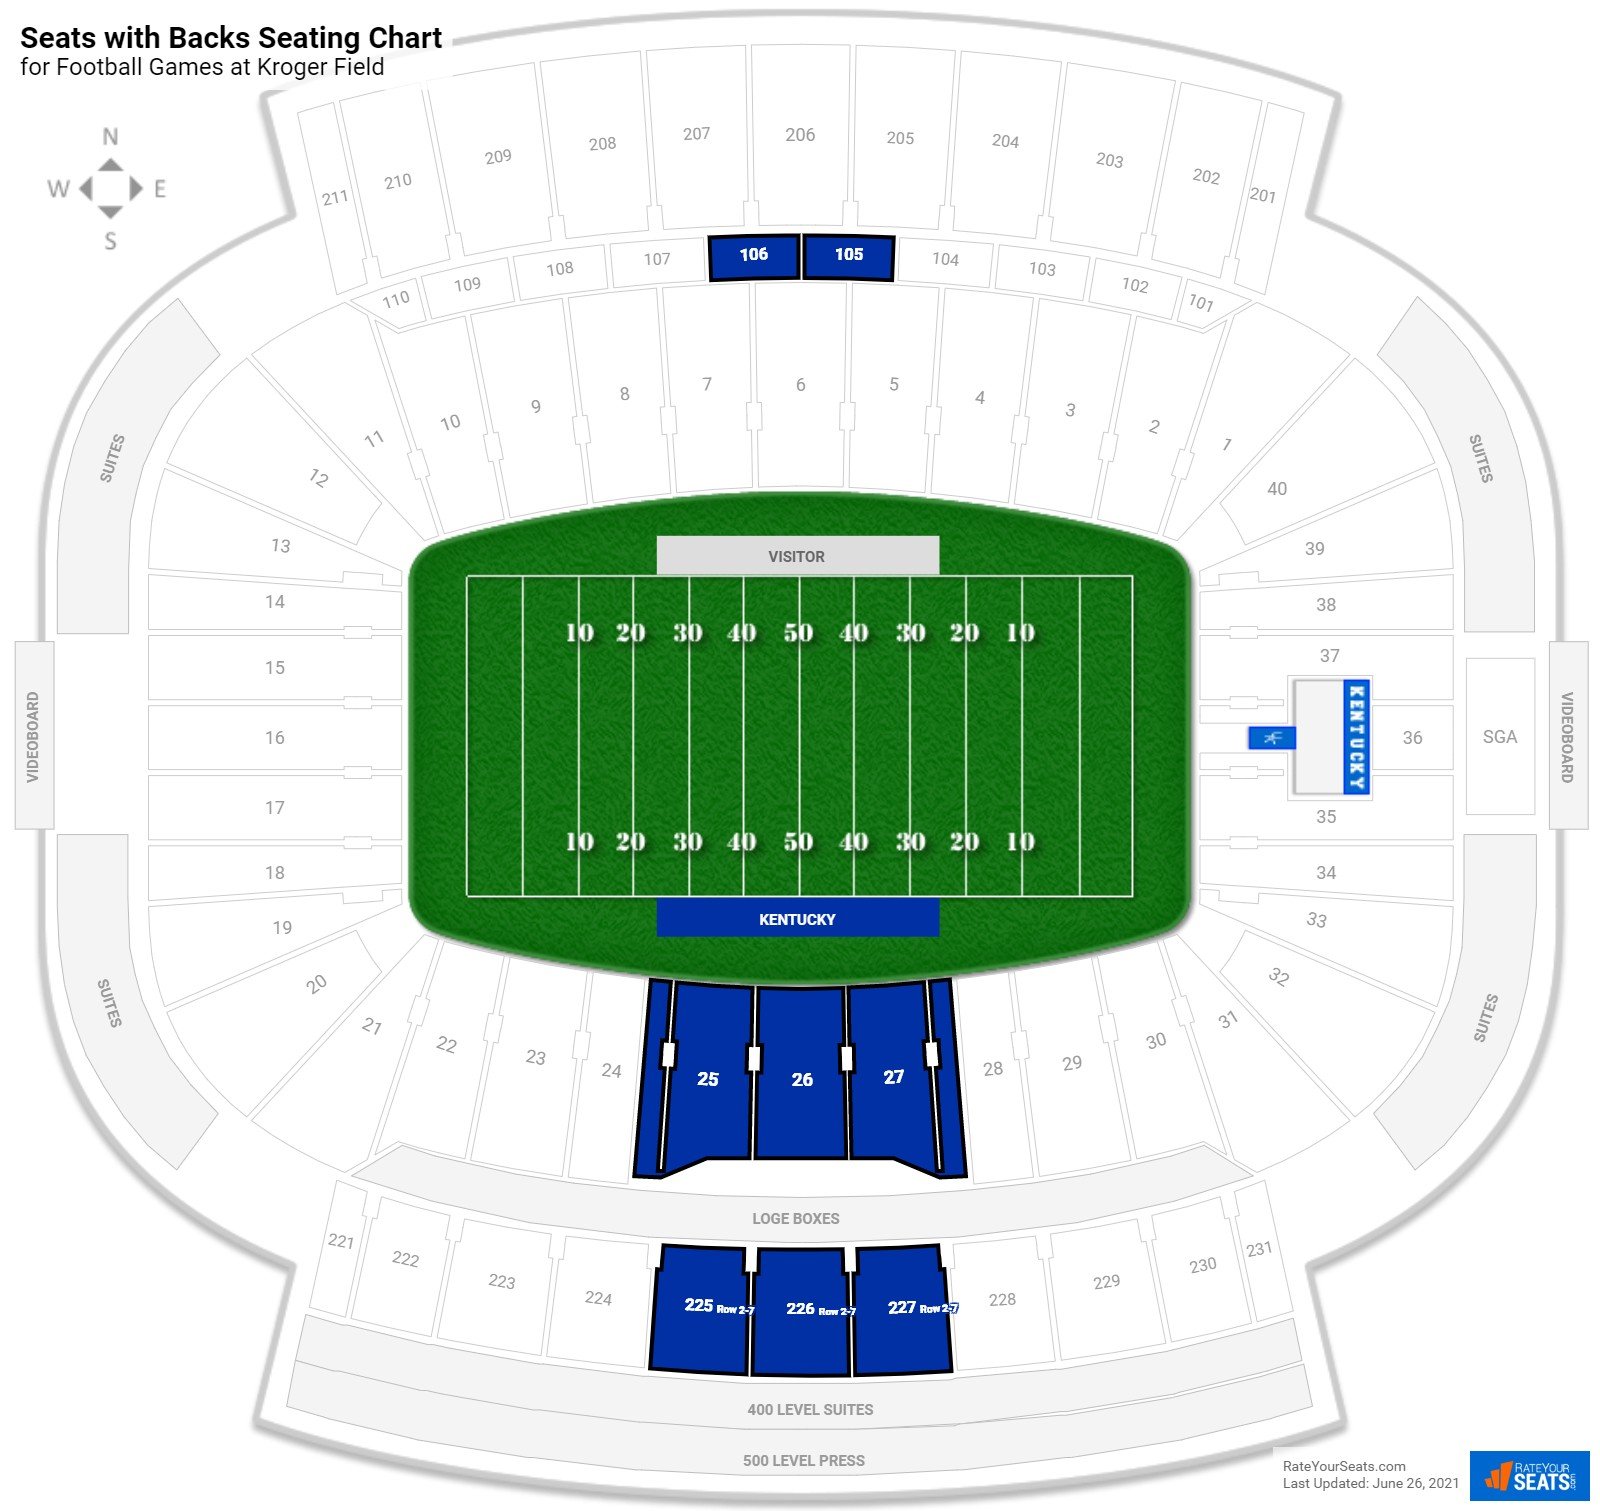 Football Seats with Backs Seating Chart at Kroger Field